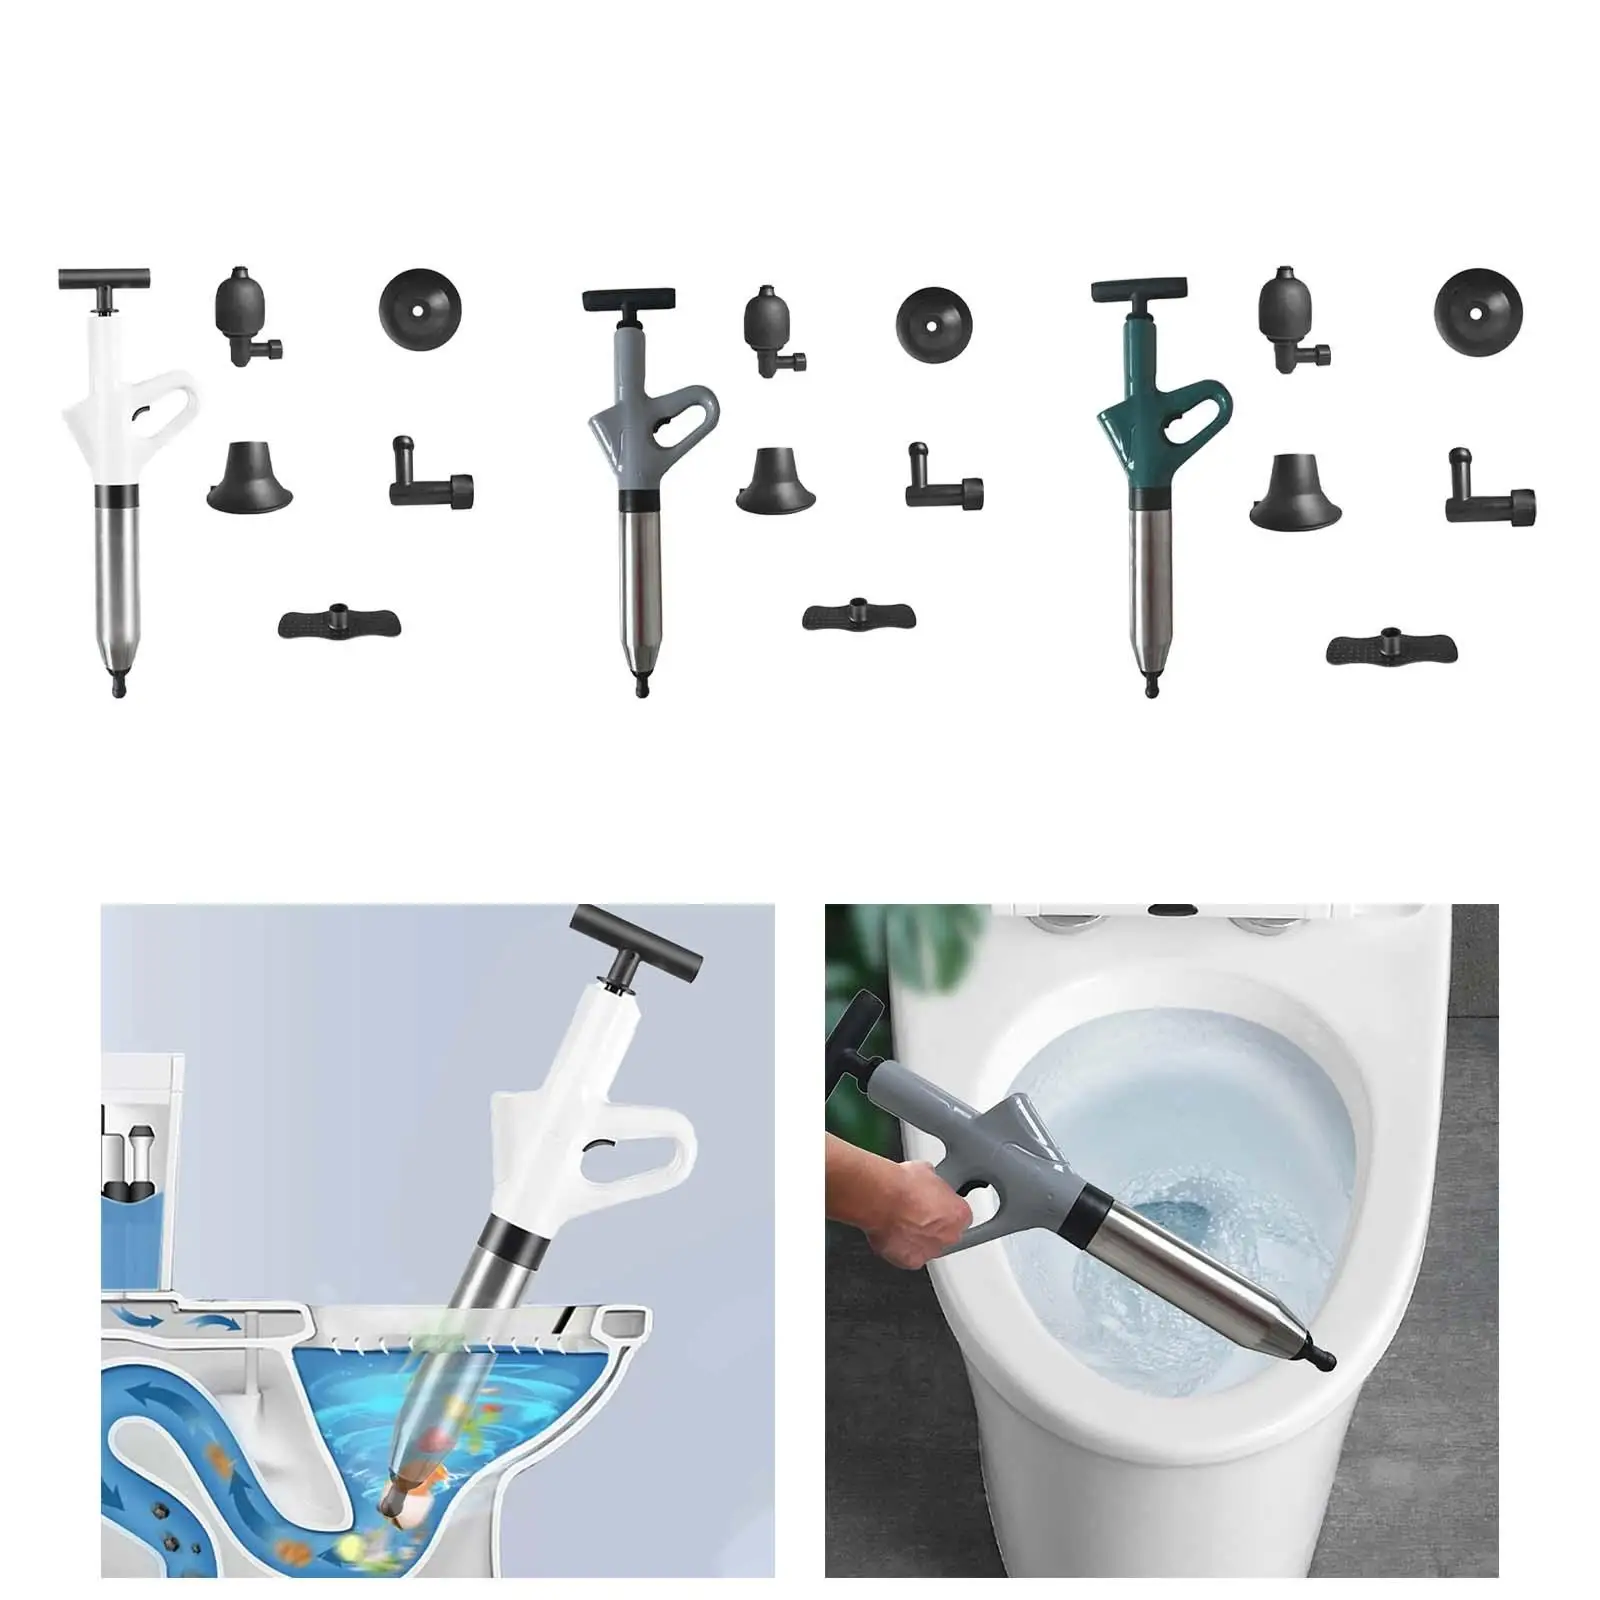 Toilet Air Plunger Sink Plungers for Clogged Toilet Toilet Drain Bathtub